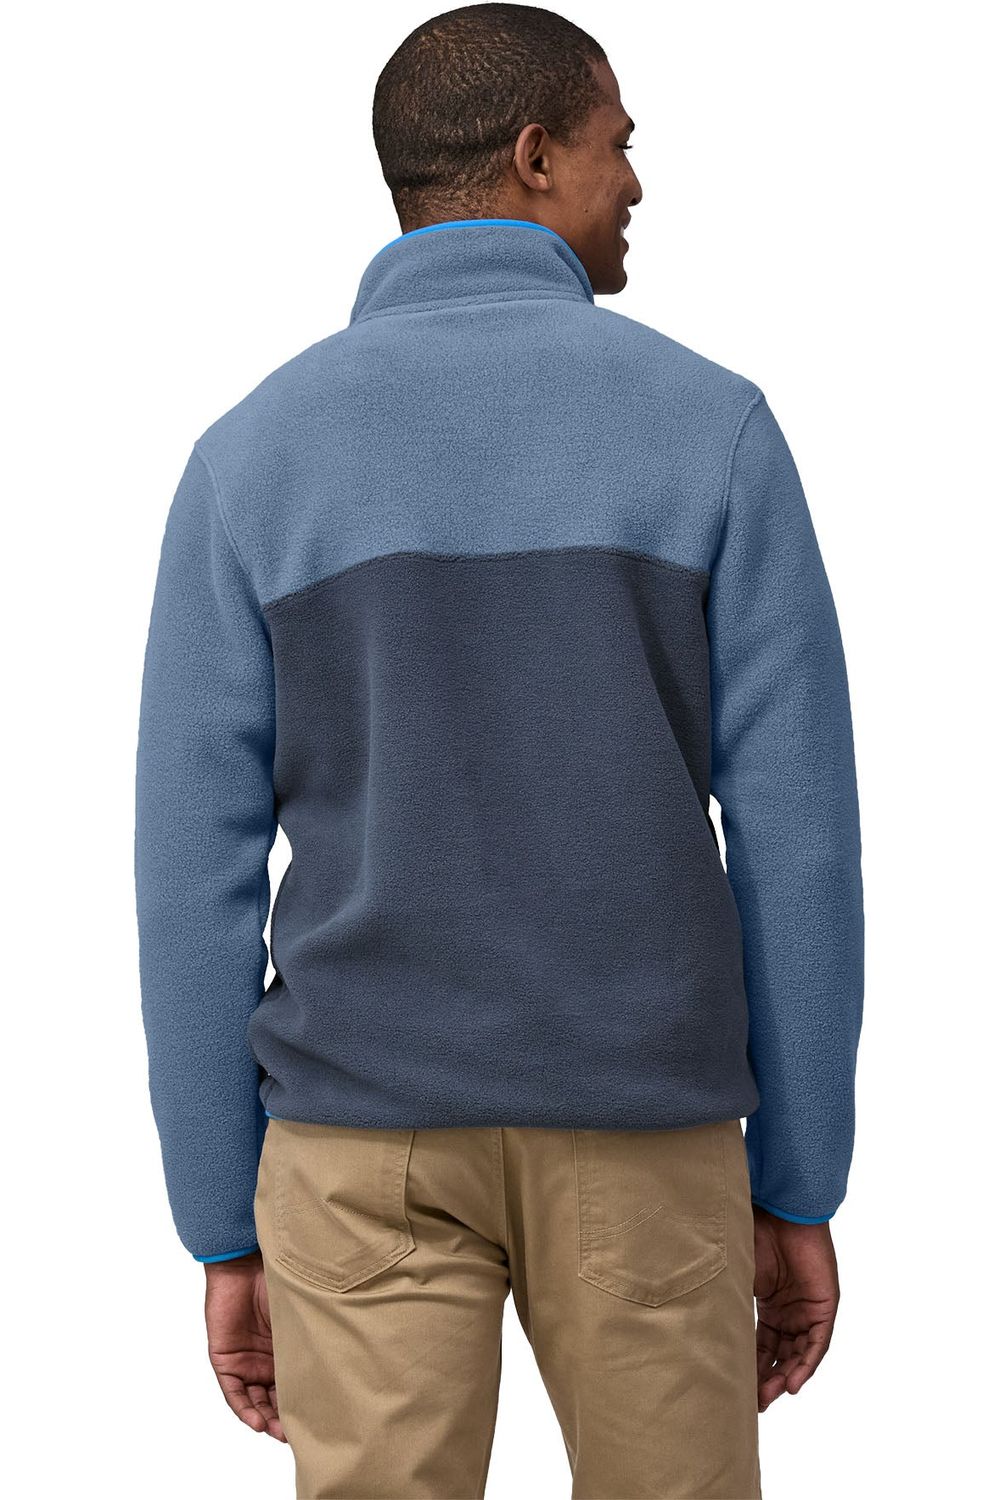 Patagonia Men's LW Synch Snap-T Pullover Smolder Blue